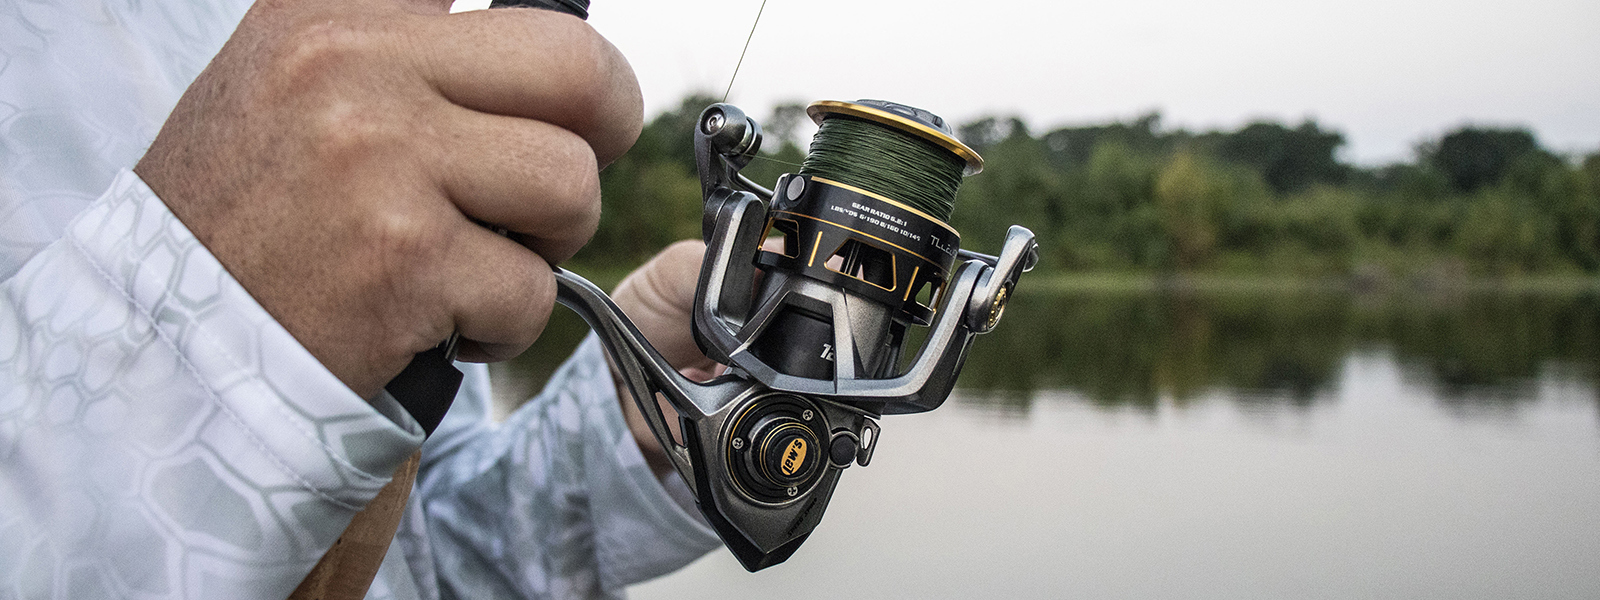 Lew's Spinning Reel